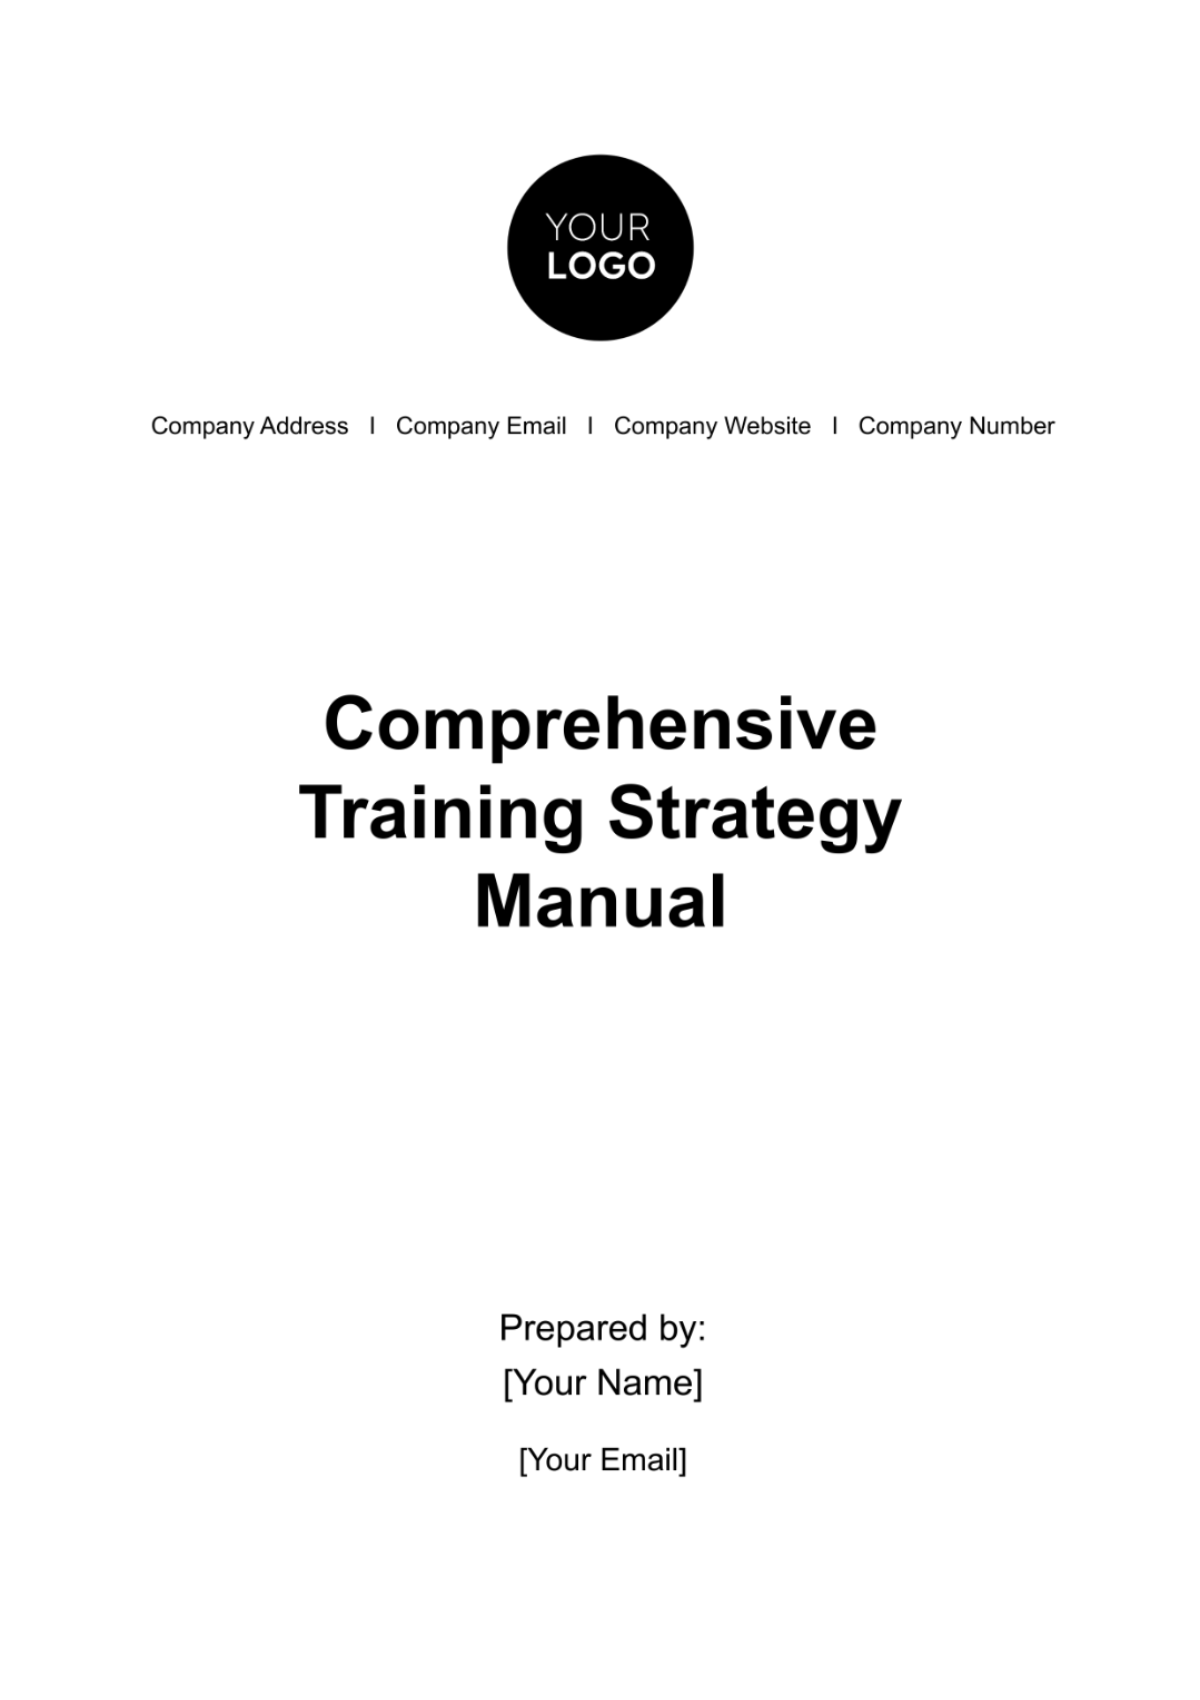 Free Comprehensive Training Strategy Manual HR Template